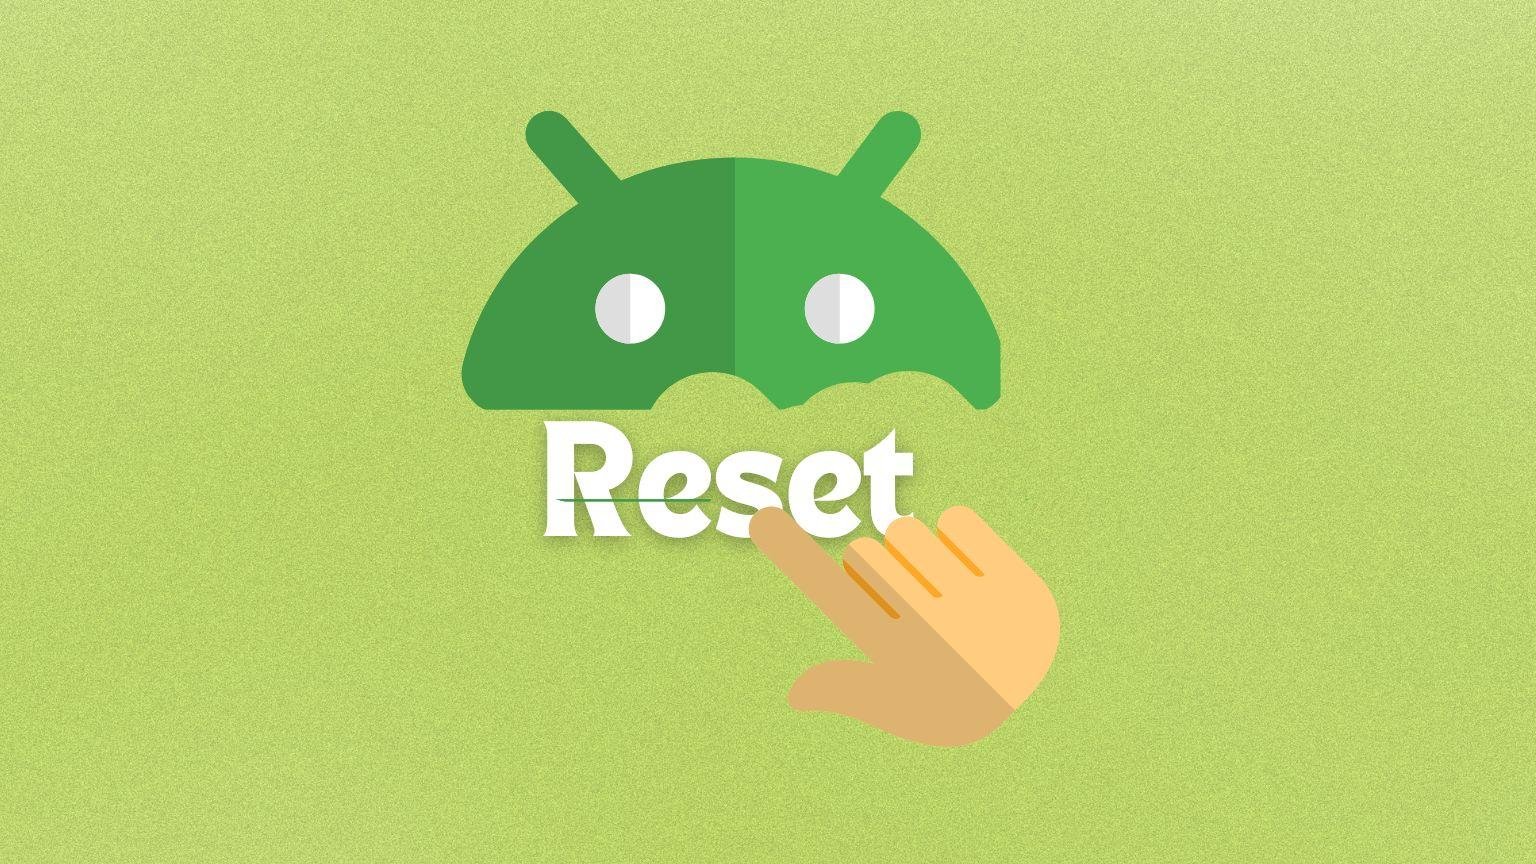 How to reset an android phone